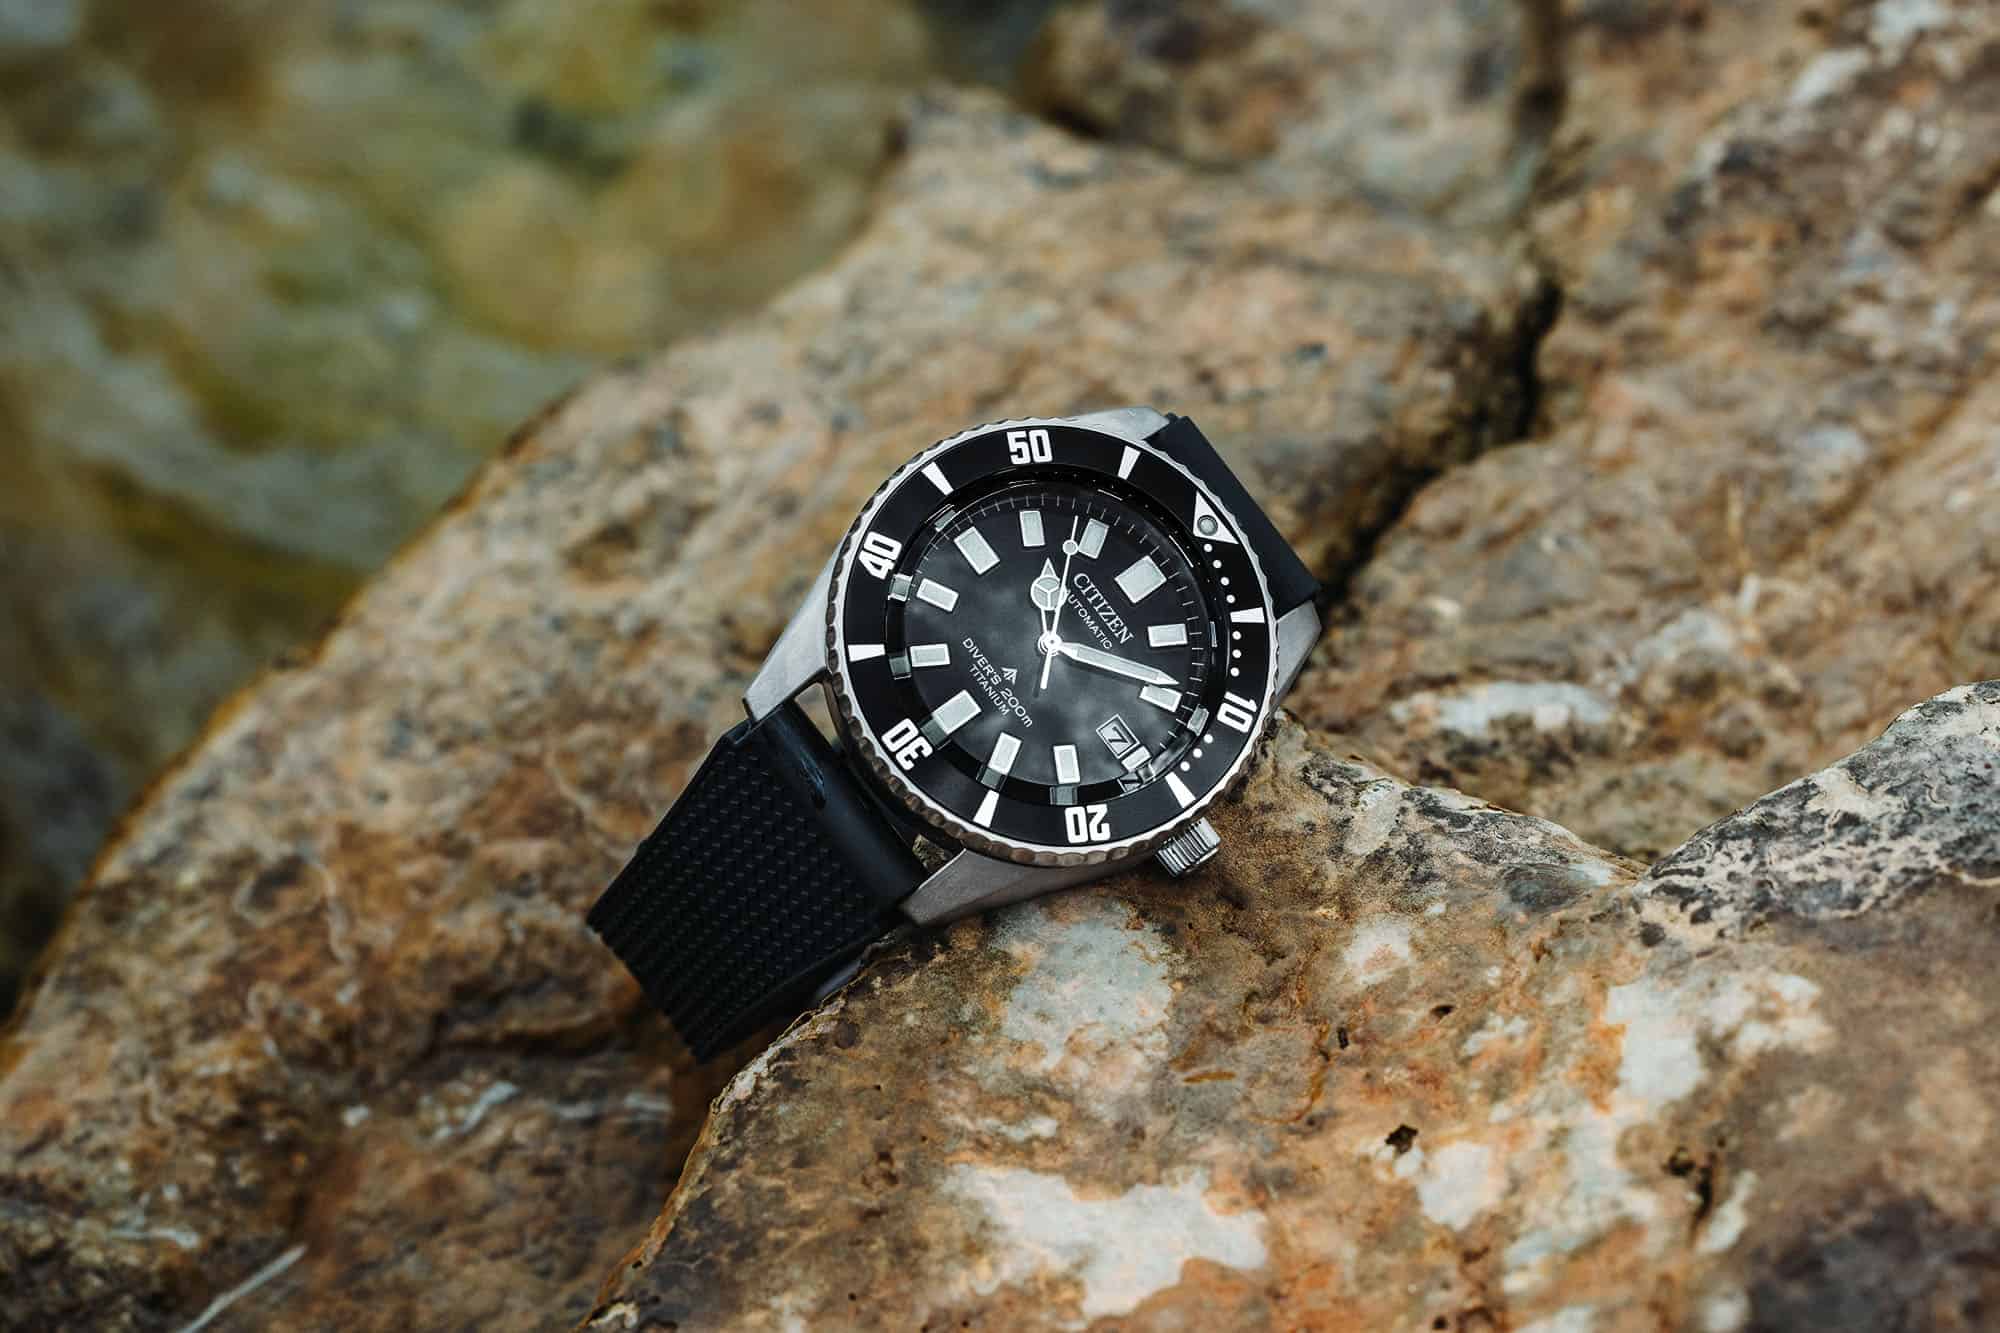 [VIDEO] Hands-On with the Citizen Promaster Dive Automatic aka Fujistubo aka Barnacle